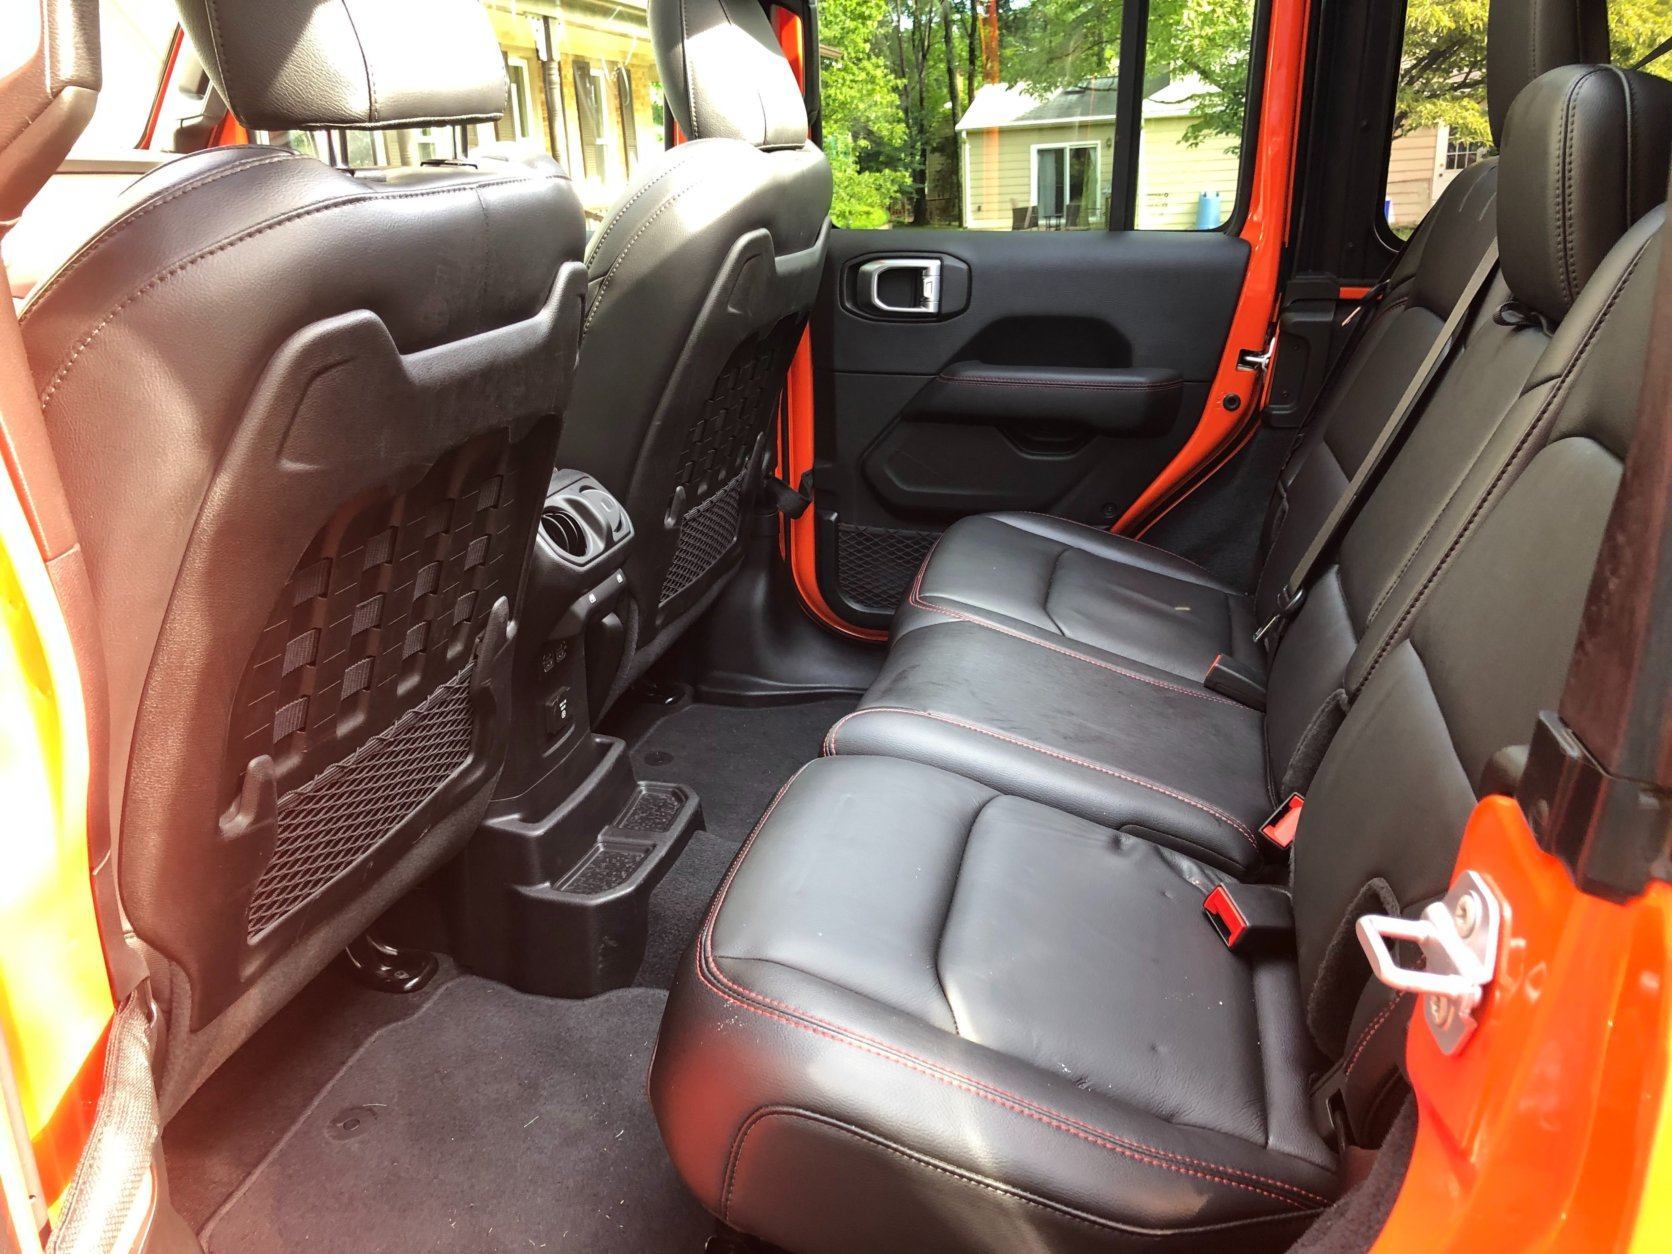 <p>The other interior materials on this Rubicon model are several steps ahead of previous generations of Jeep Wranglers. While this isn’t a luxury vehicle by any means, it could attract some other people that thought the Wrangler was too bare bones before.</p>
